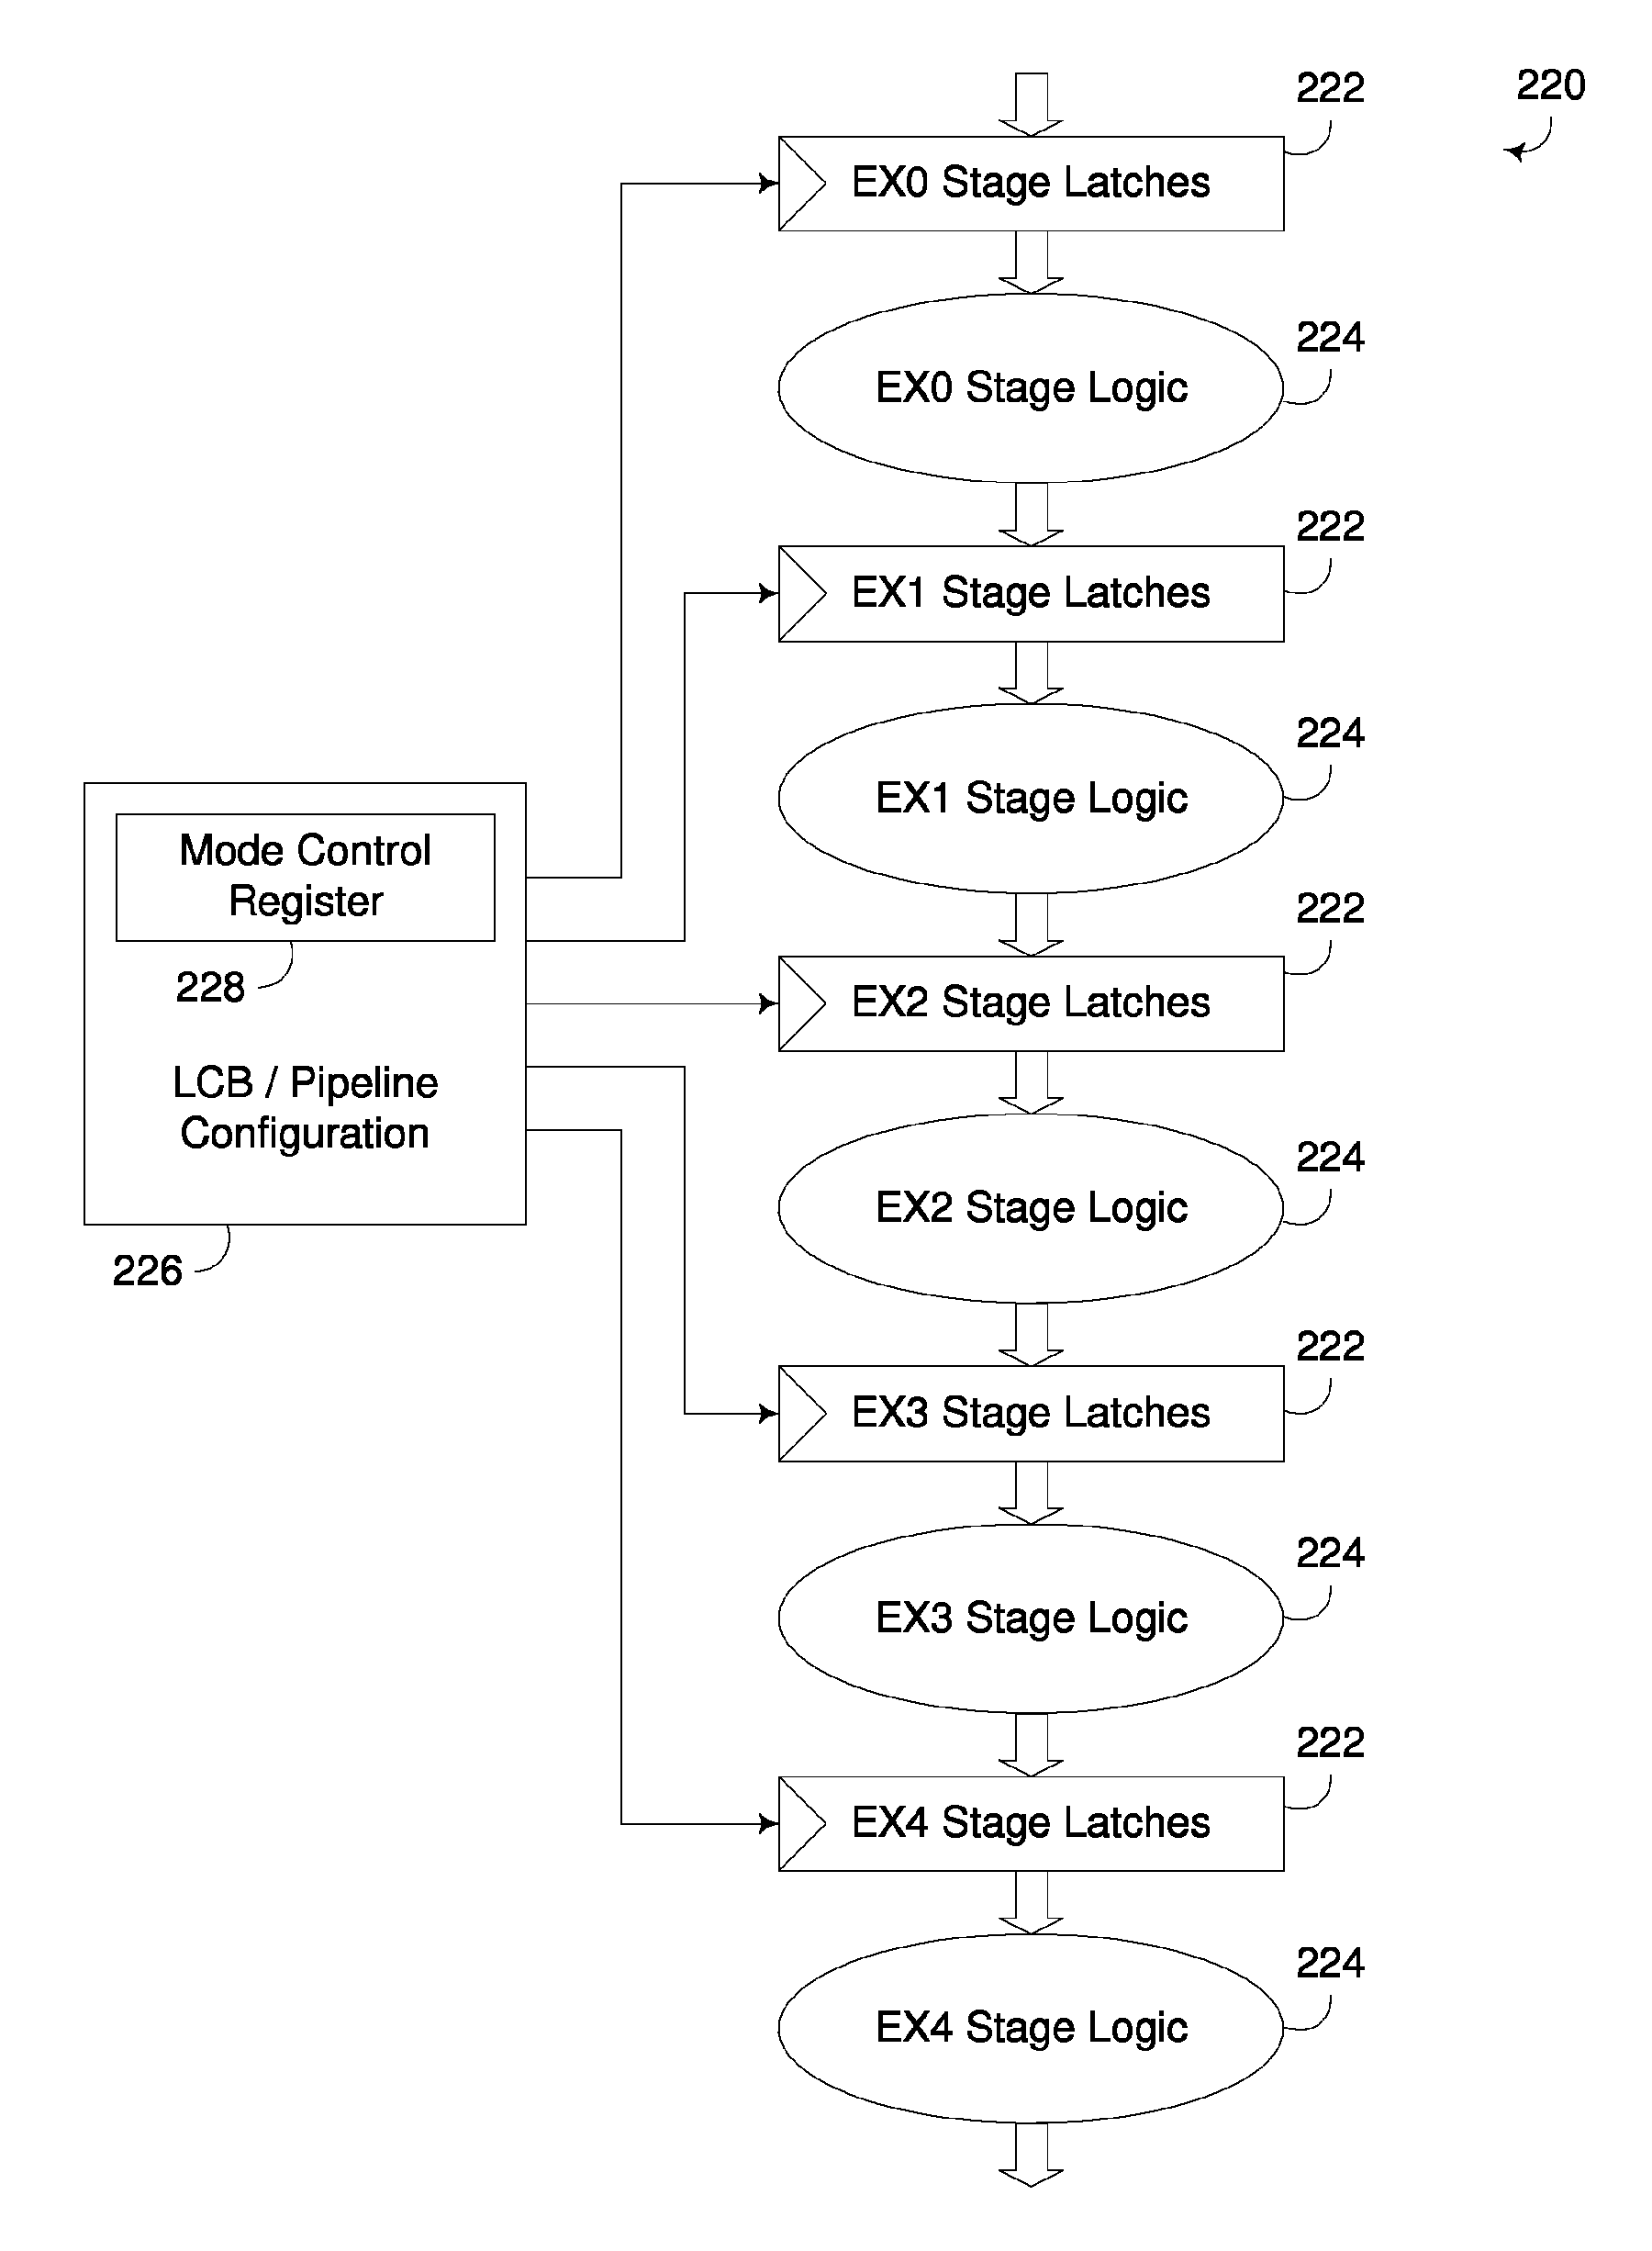 Dynamic merging of pipeline stages in an execution pipeline to reduce power consumption